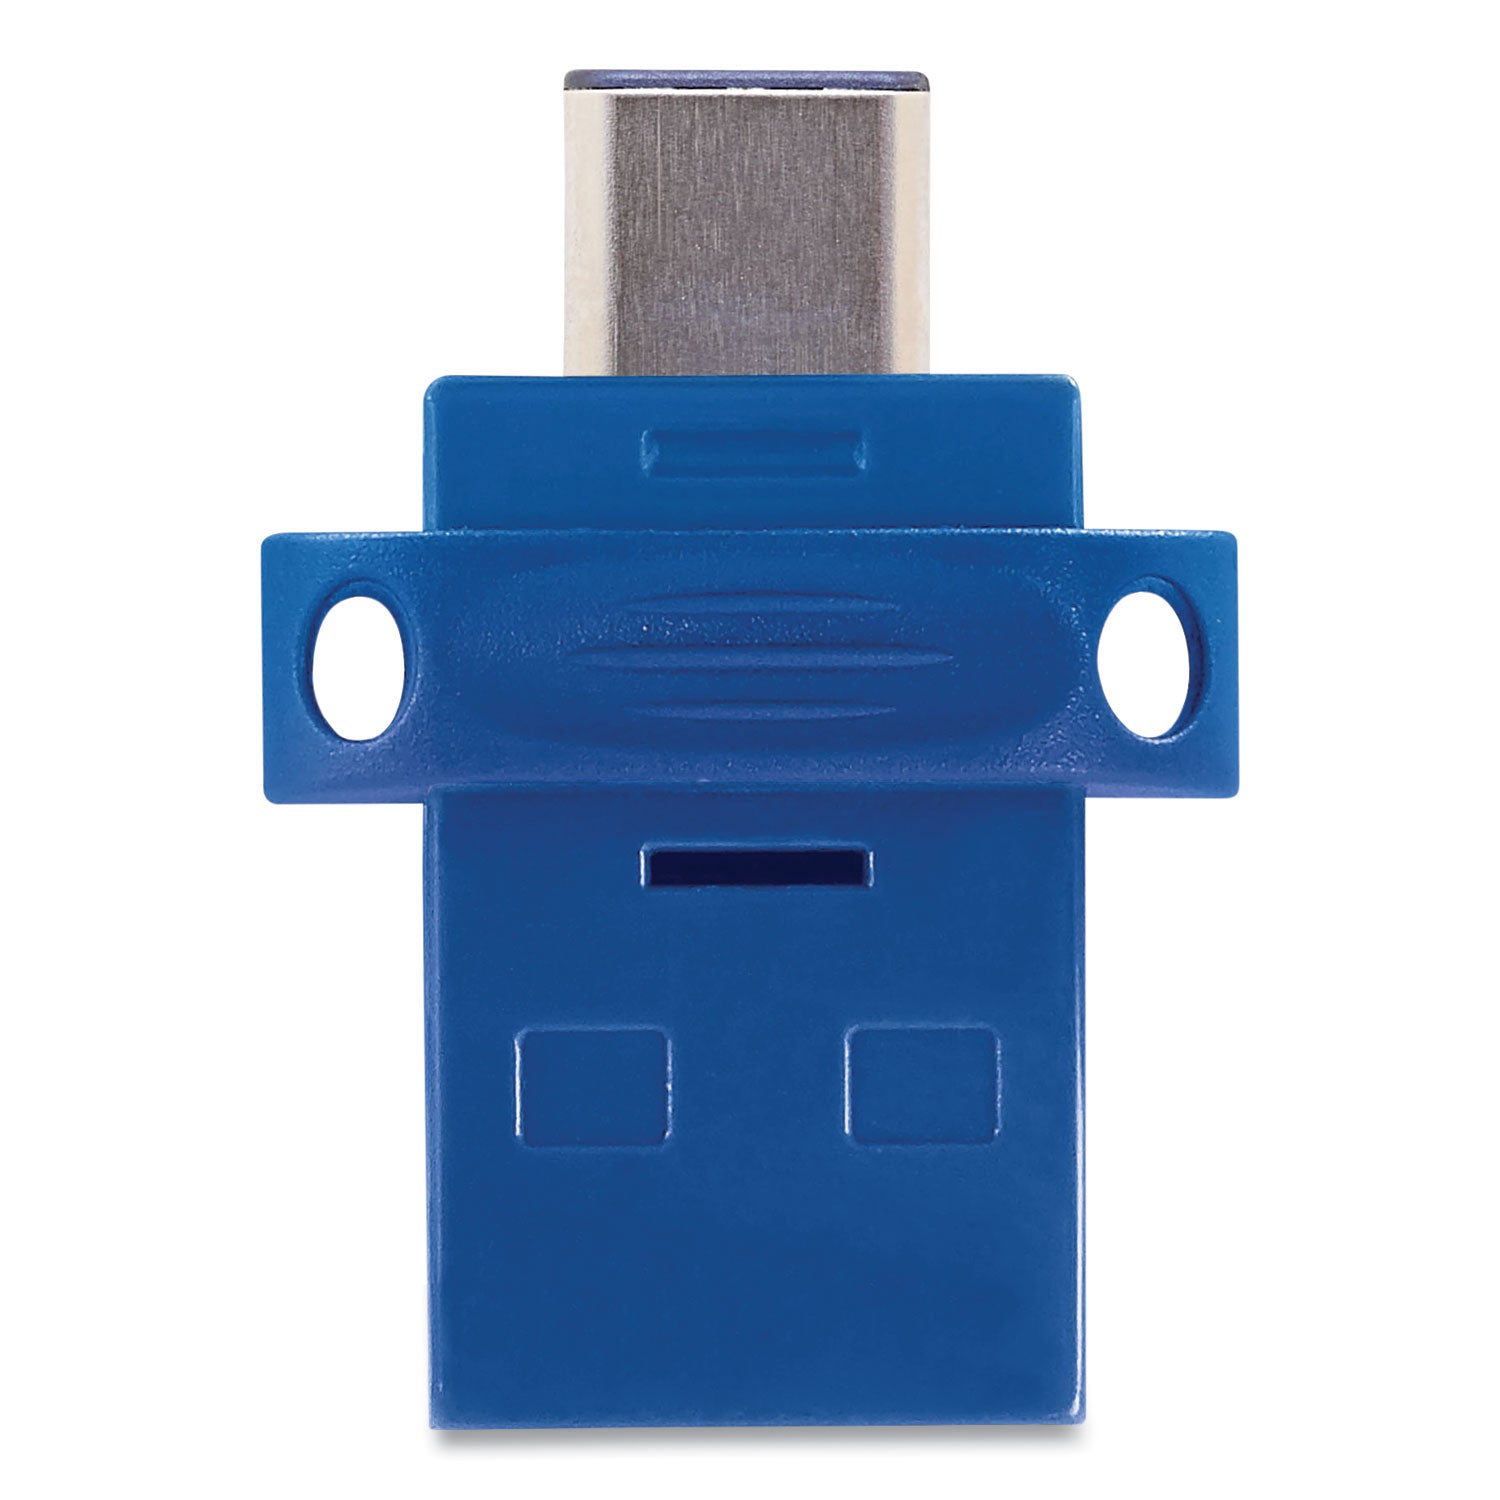 store-n-go-dual-usb-30-flash-drive-for-usb-c-devices-32-gb-blue_ver99154 - 4